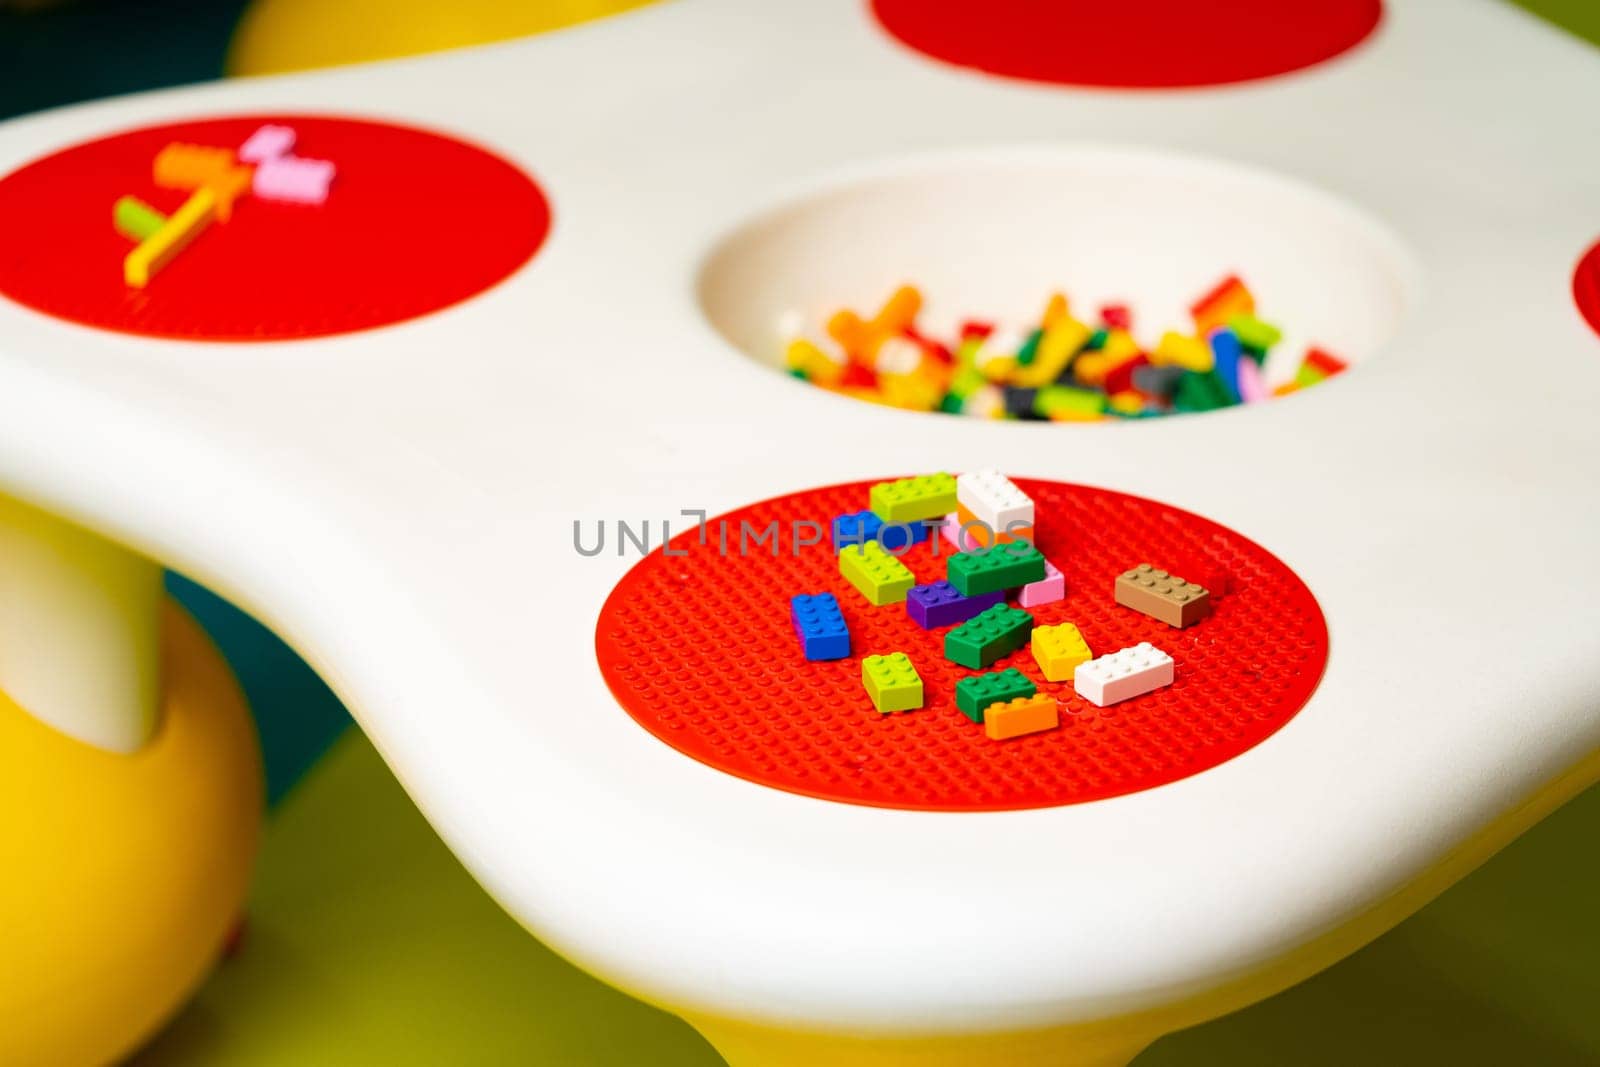 A close-up view of a childs play table filled with colorful toys. Various toys like blocks, dolls, cars, and puzzles are scattered around the table. The childs hands are seen playing and interacting with the toys.